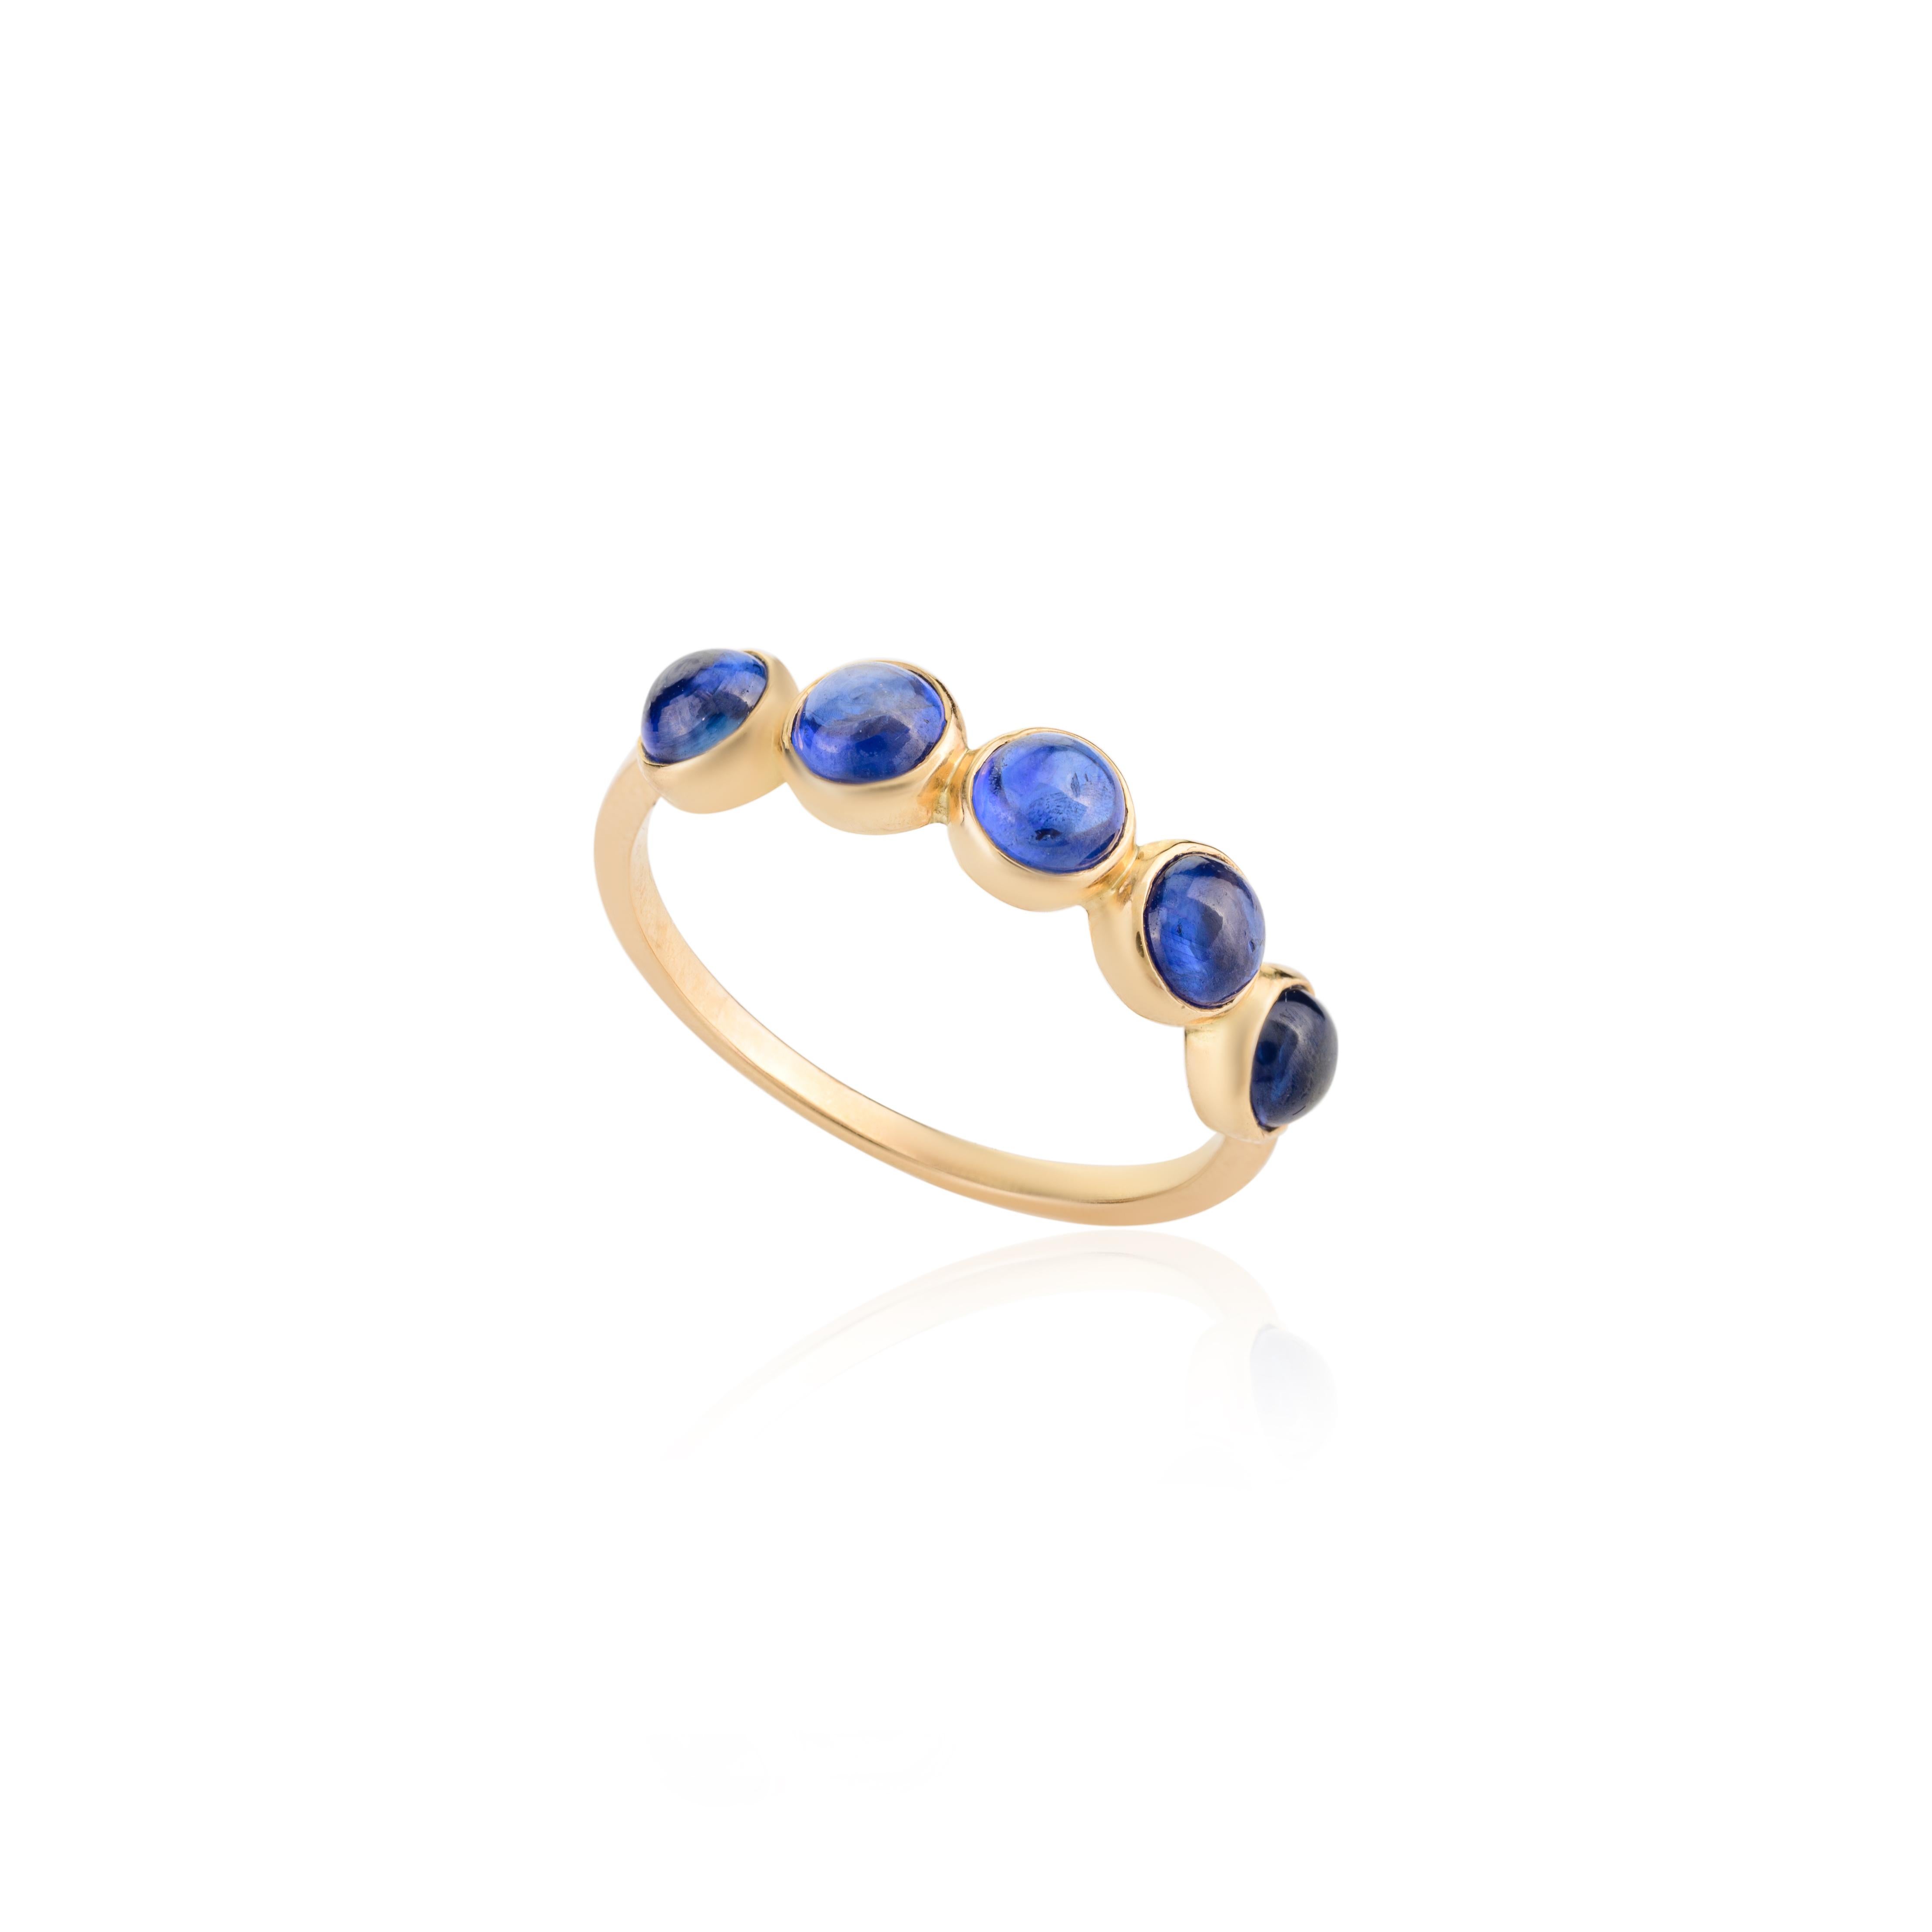 For Sale:  Blue Sapphire Bezel Set Band Stacking Ring in 14k Solid Yellow Gold Gift for Her 4